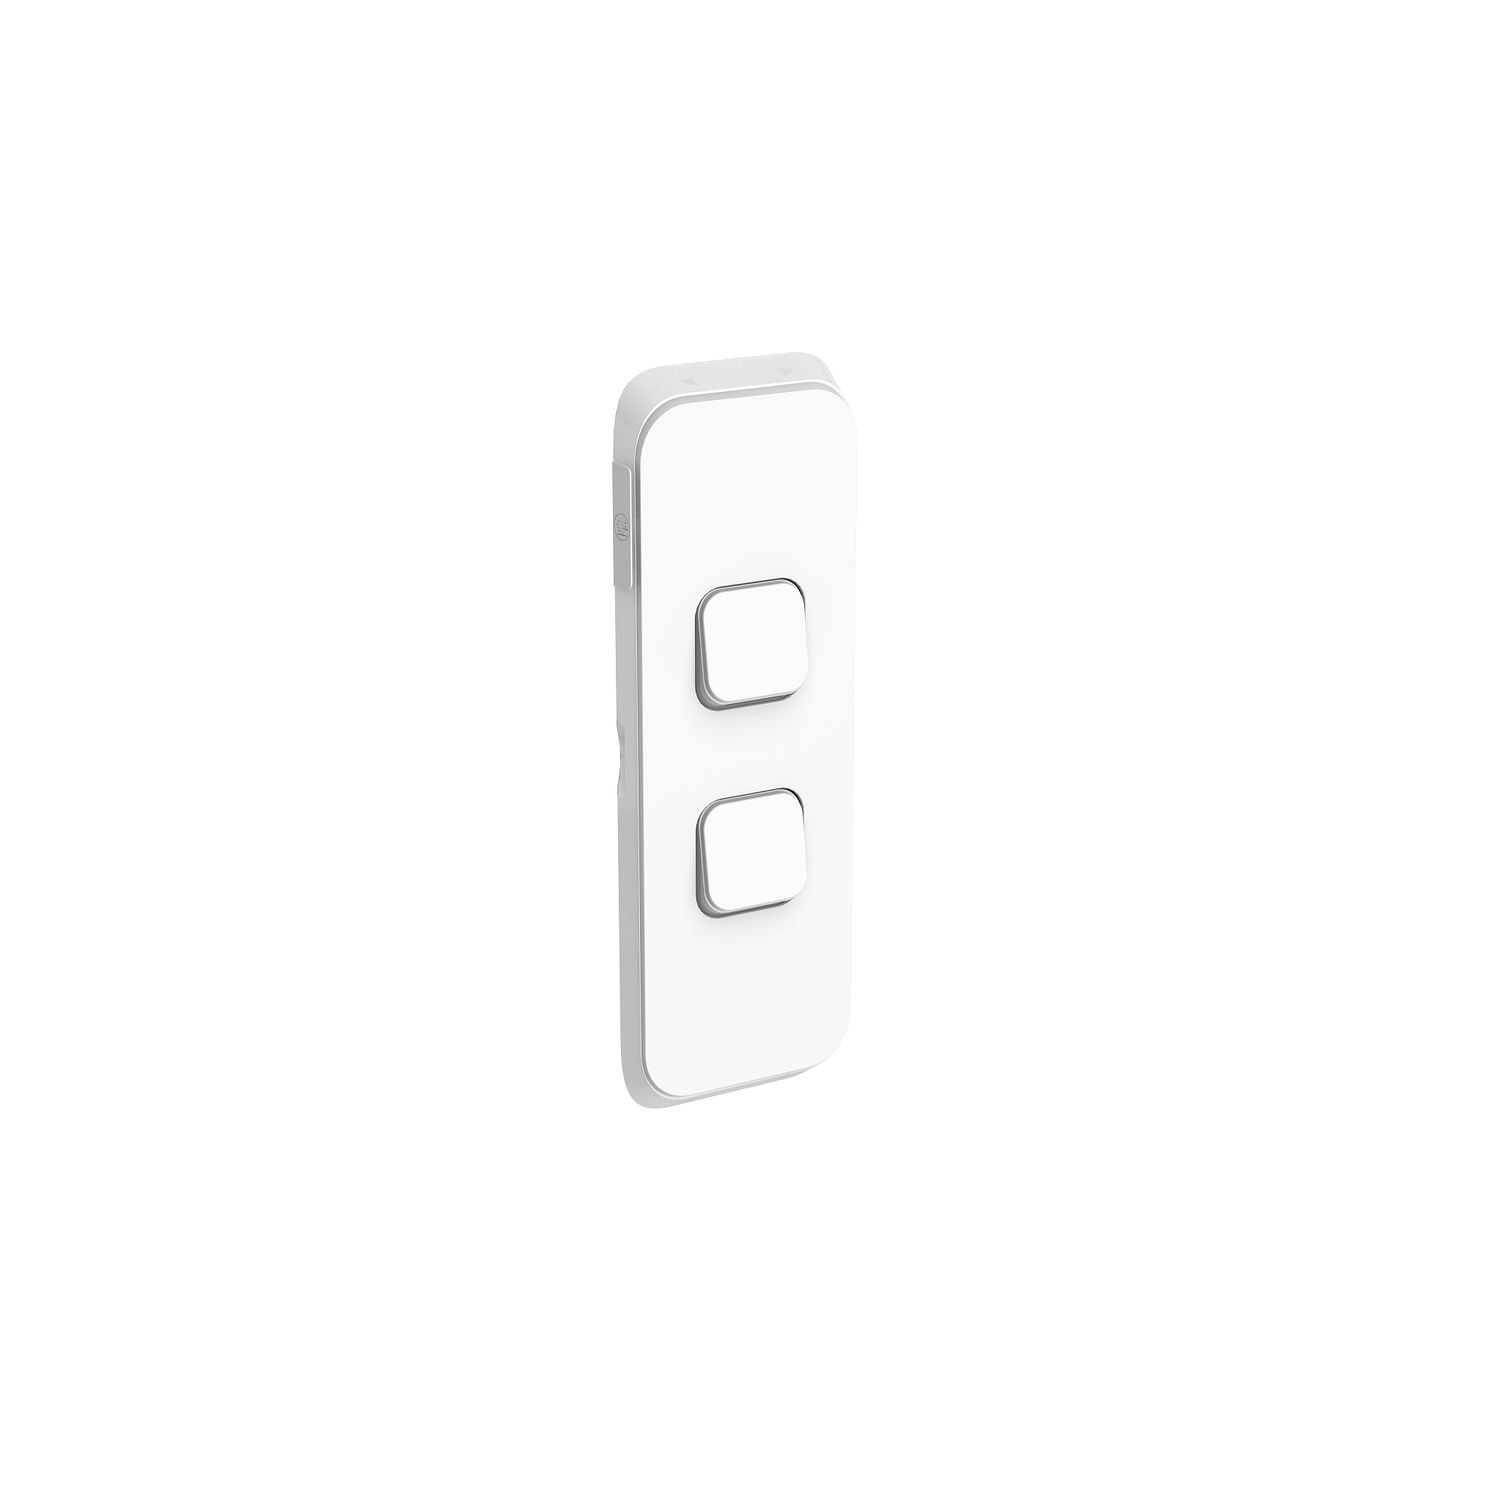 PDL Iconic - Cover Plate Switch Architrave 2-Gang - Vivid White